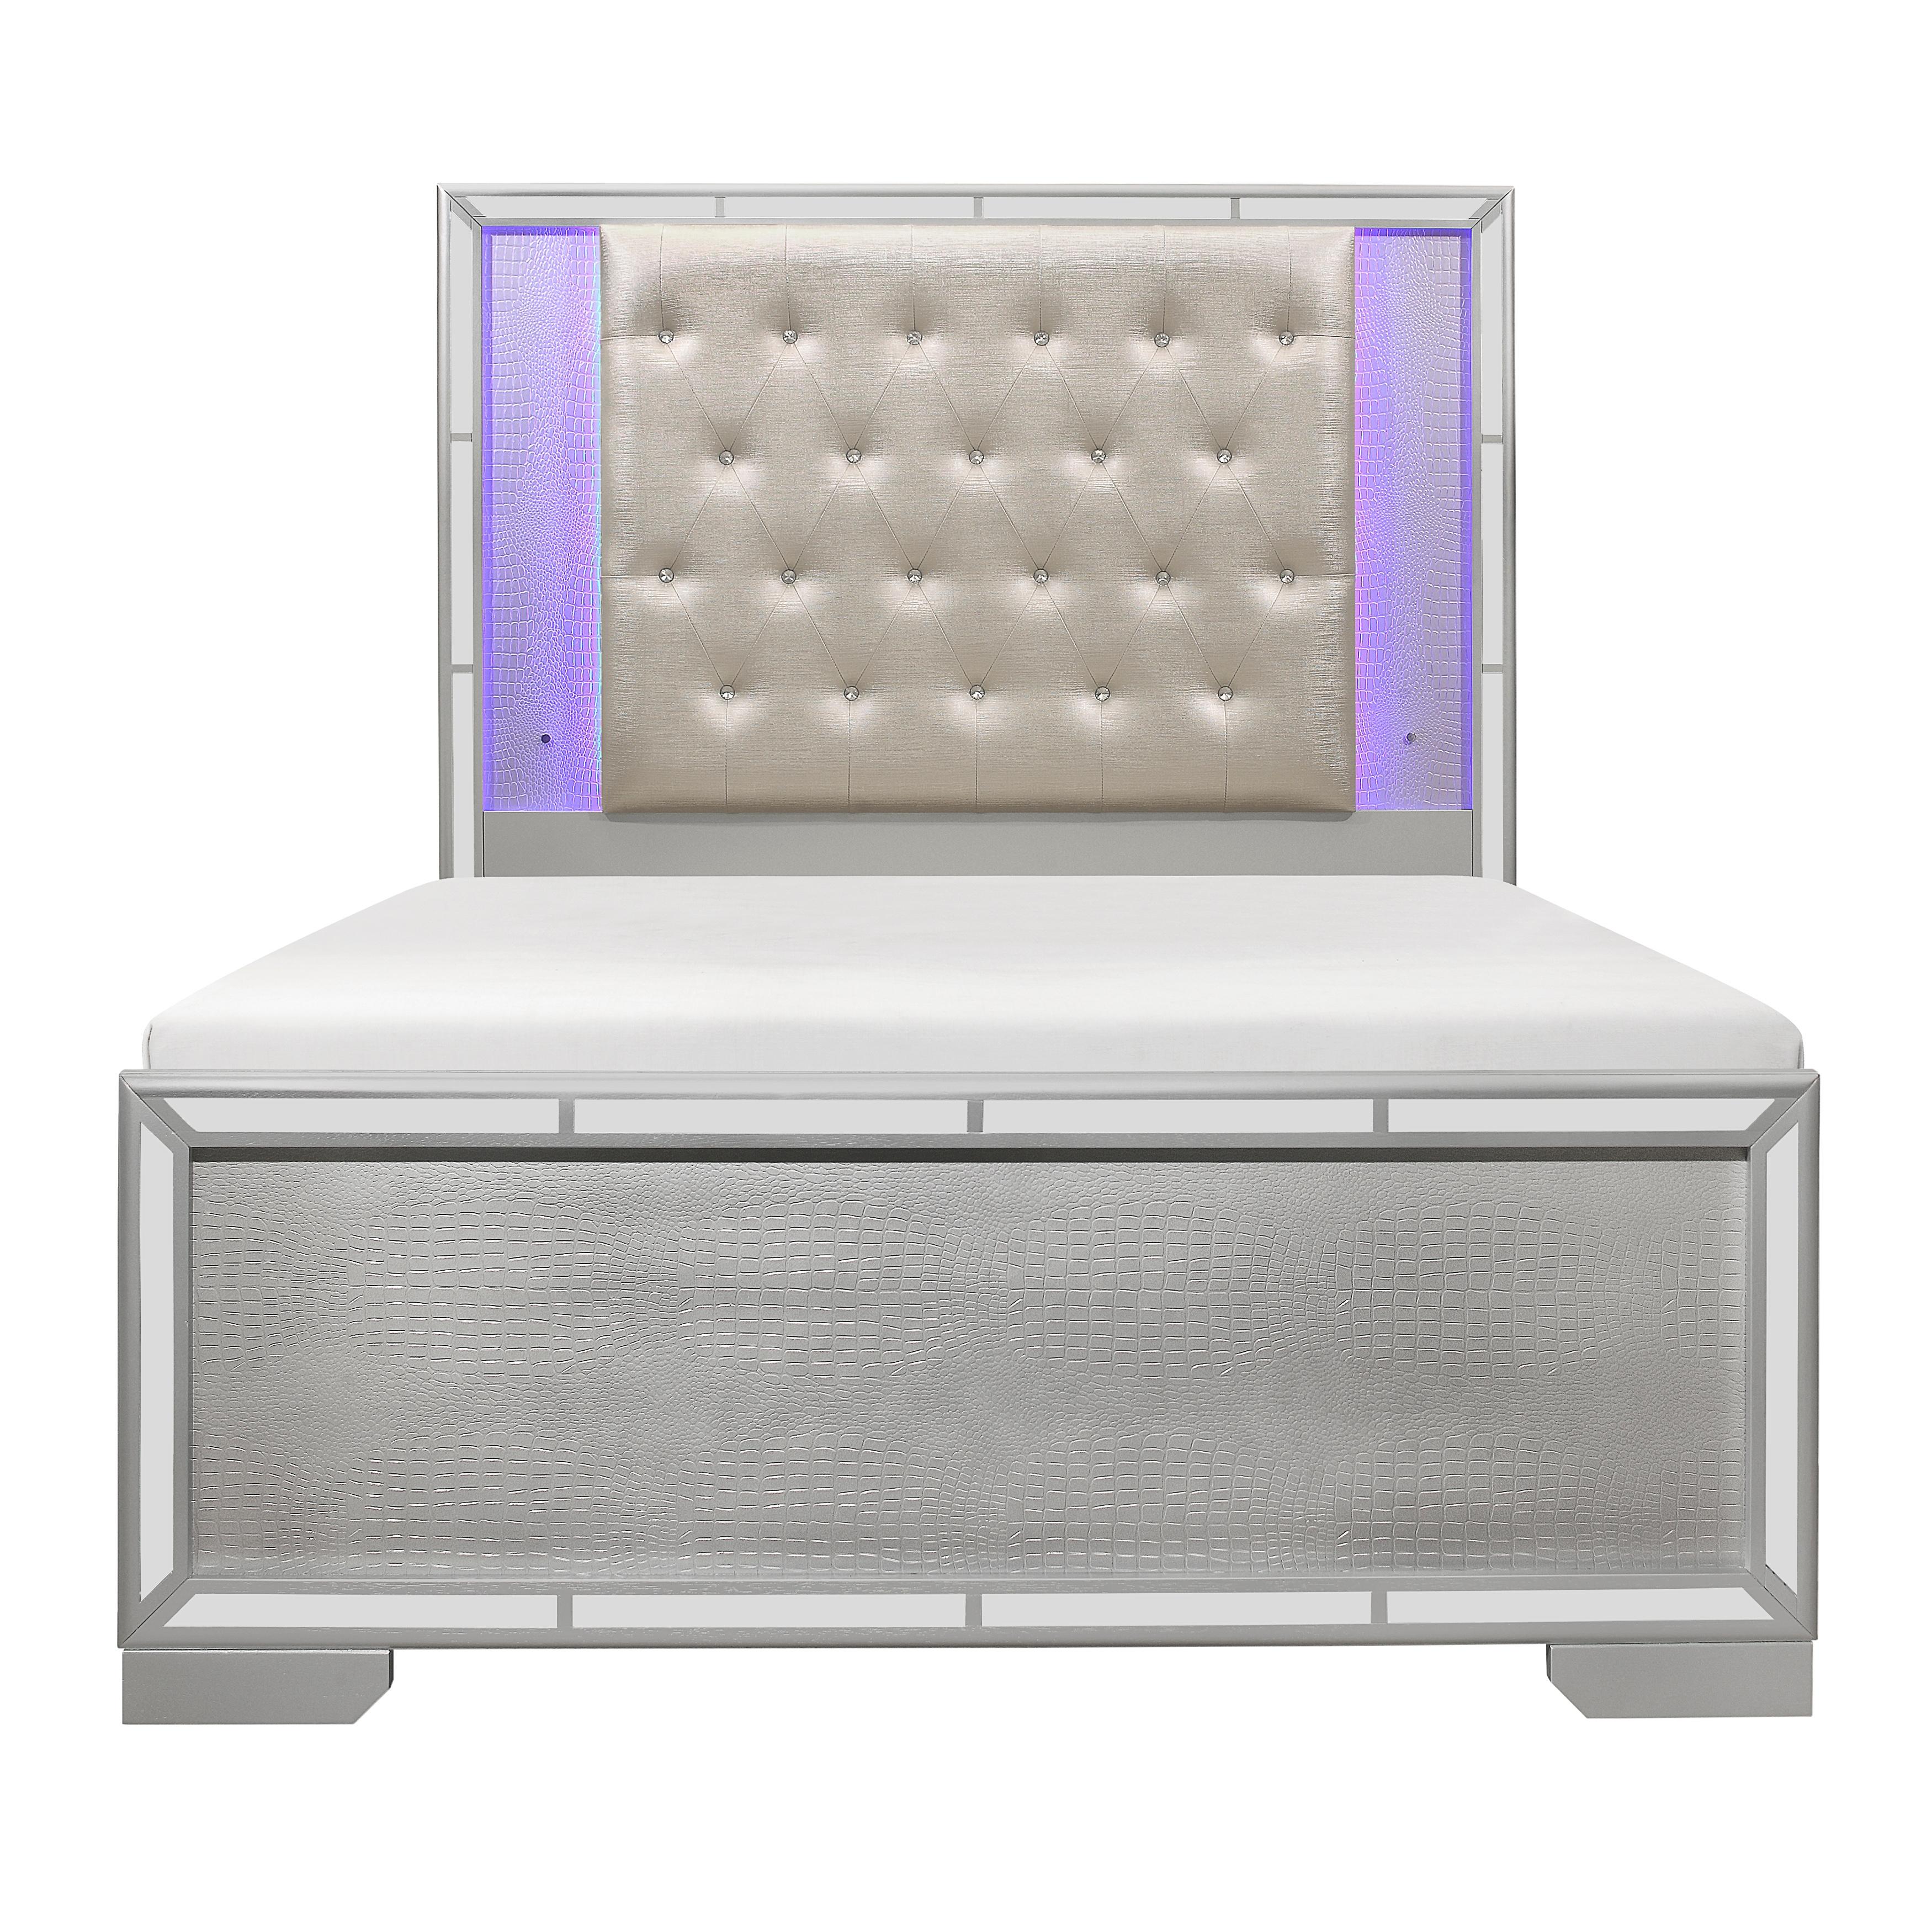 Modern Bed 1428SVK-1CK* Aveline 1428SVK-1CK* in Silver Faux Leather